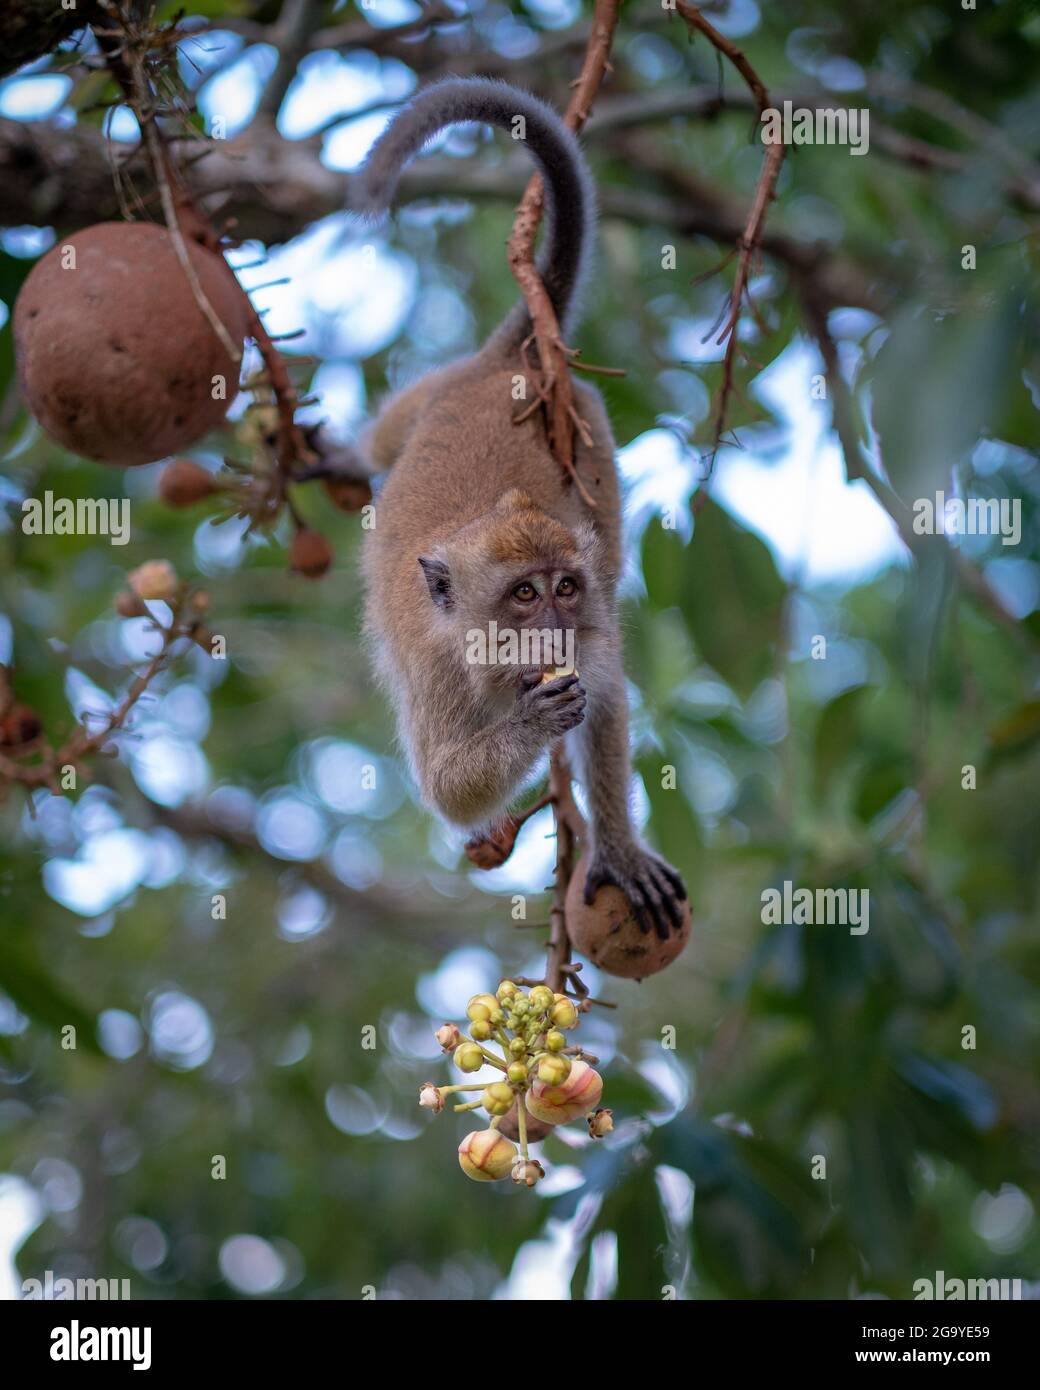 Monkey on a cannonball tree eating berries, Malaysia Stock Photo